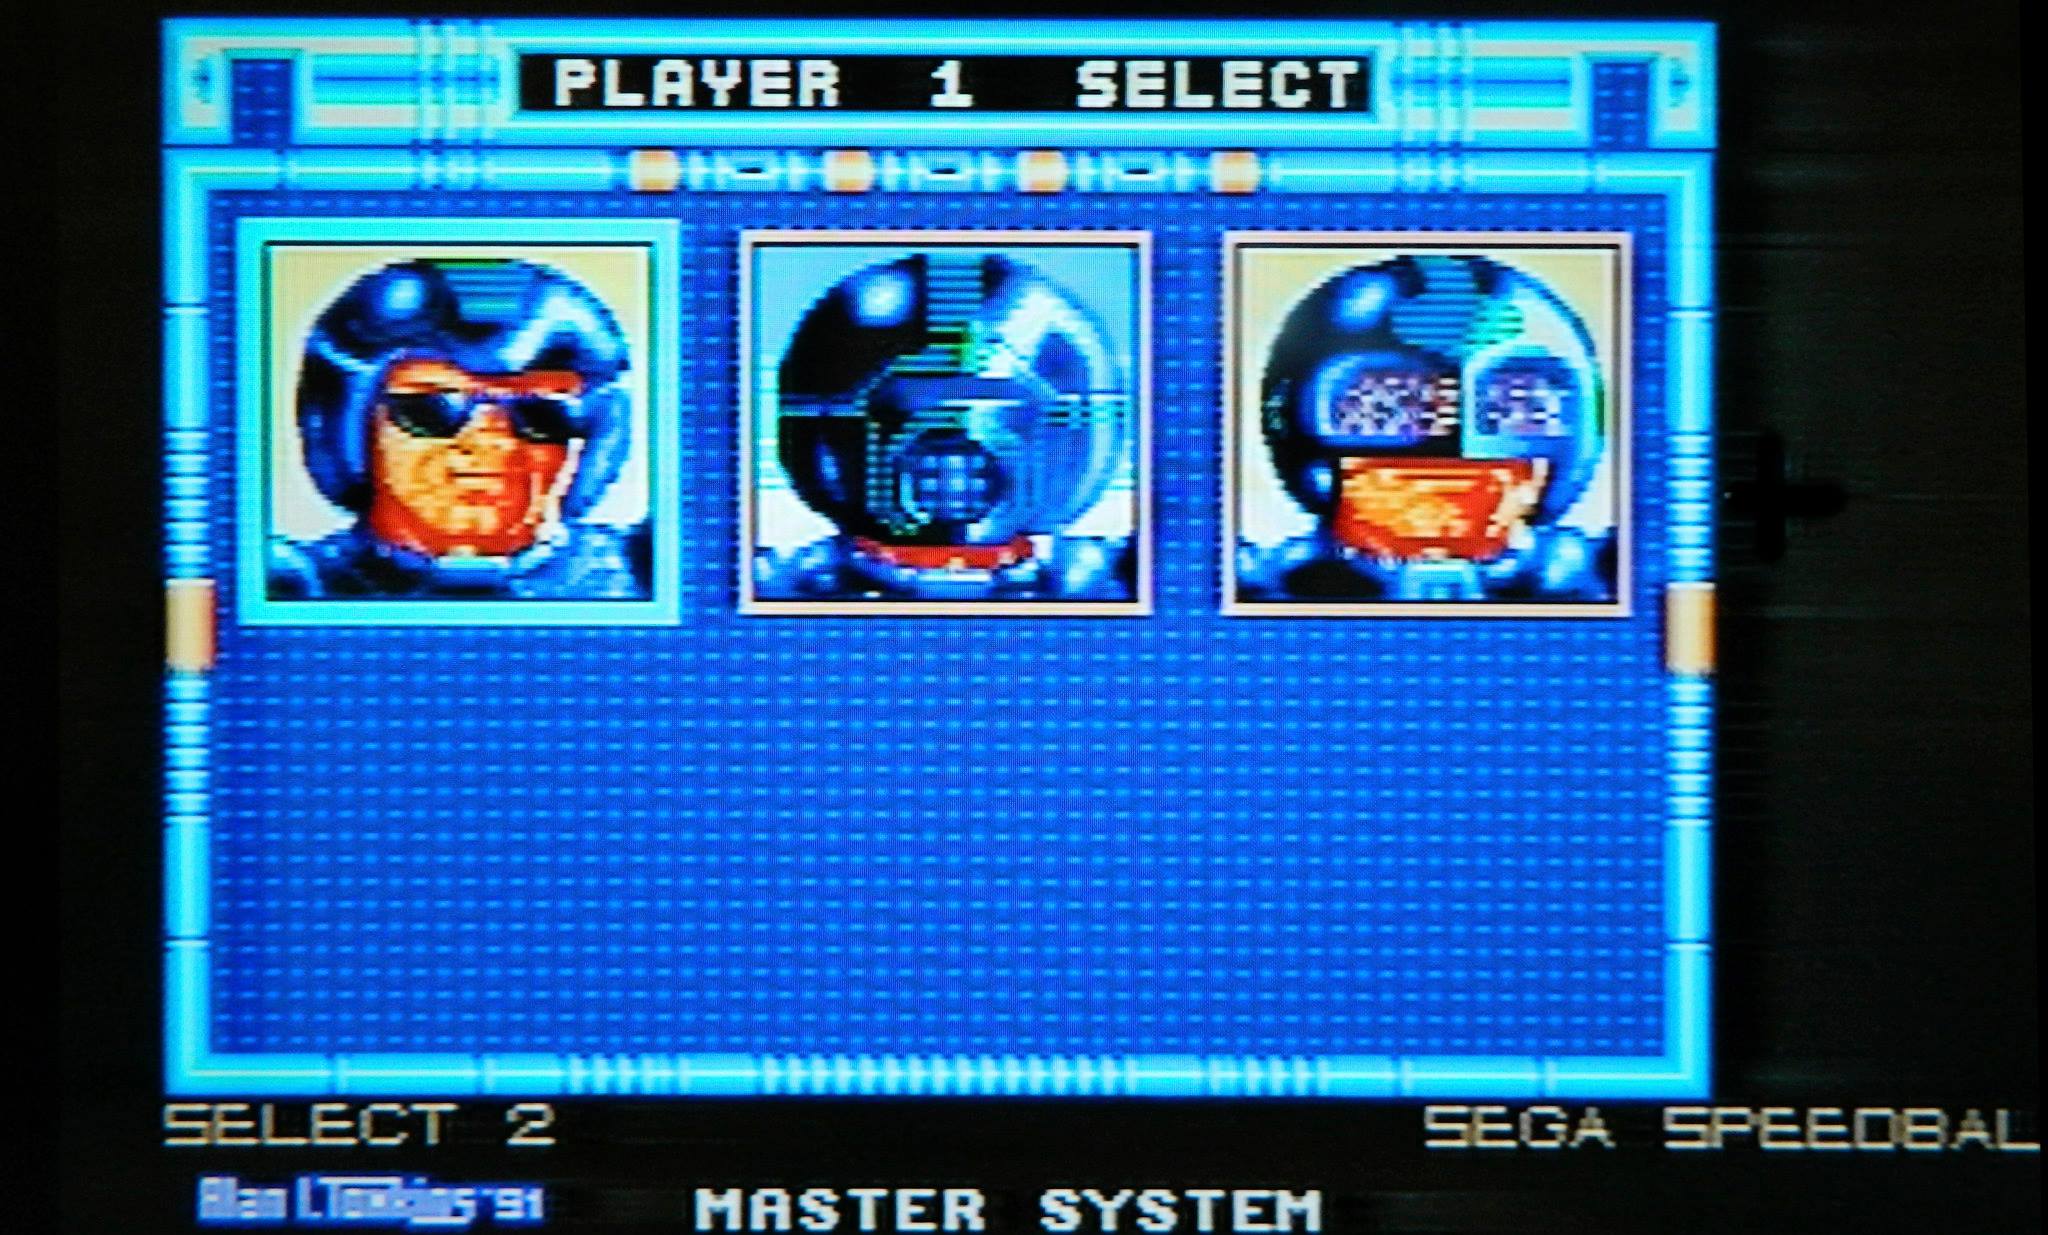 Alan did the Sega Mastersystem conversions of 'Xenon 2' and 'Speedball' (of which we see a shot over here)